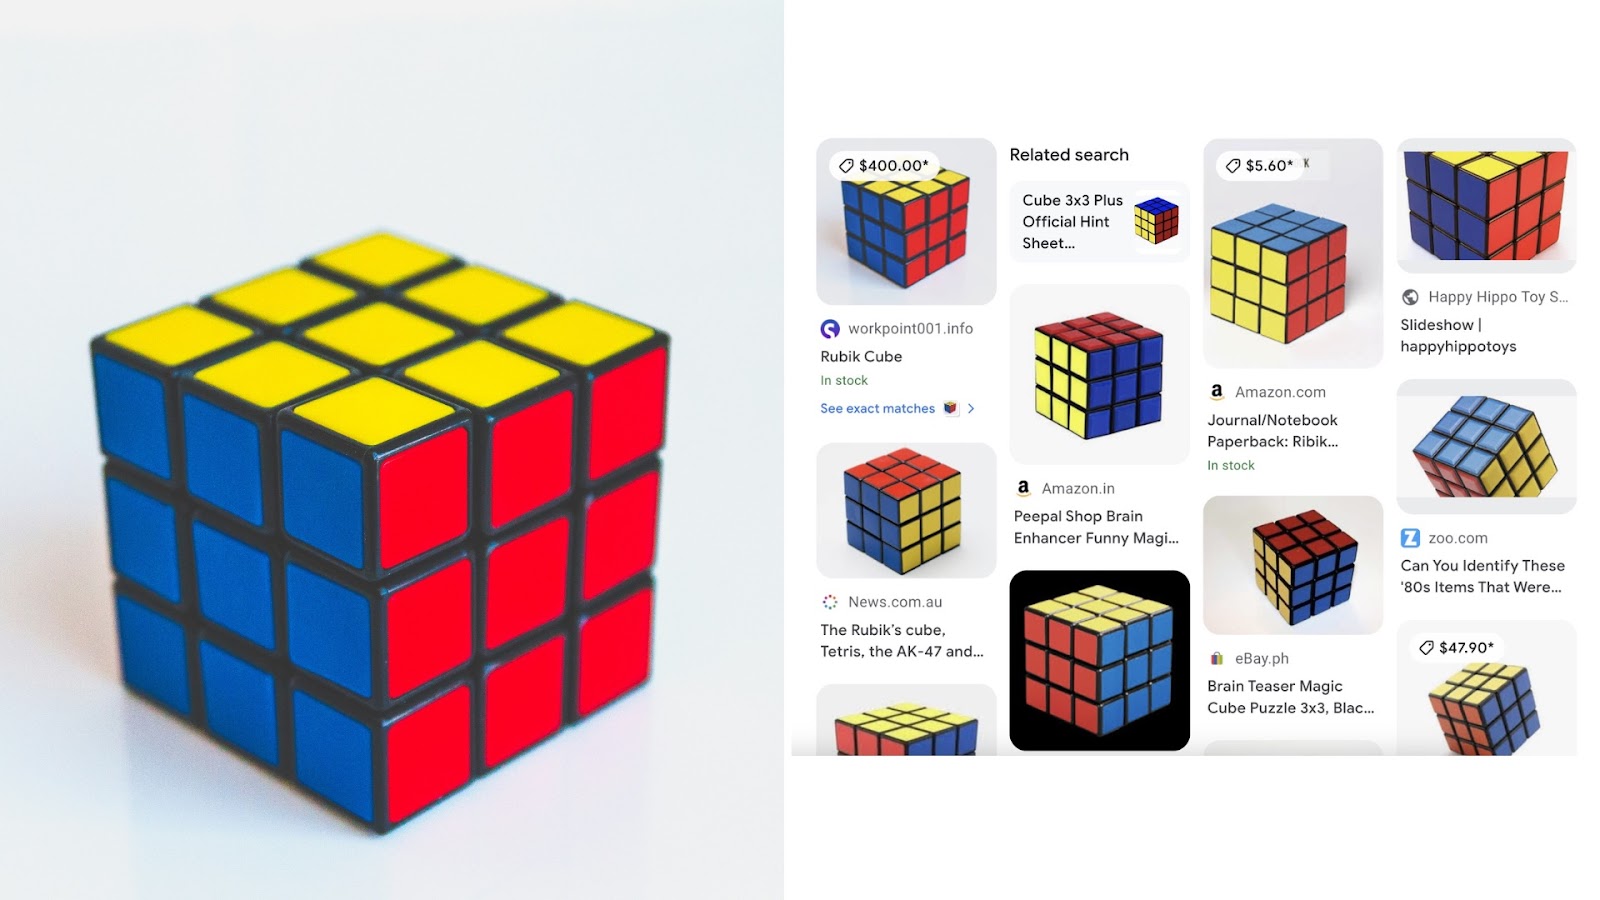 Google reverse image search results page for an image of a rubik's cube